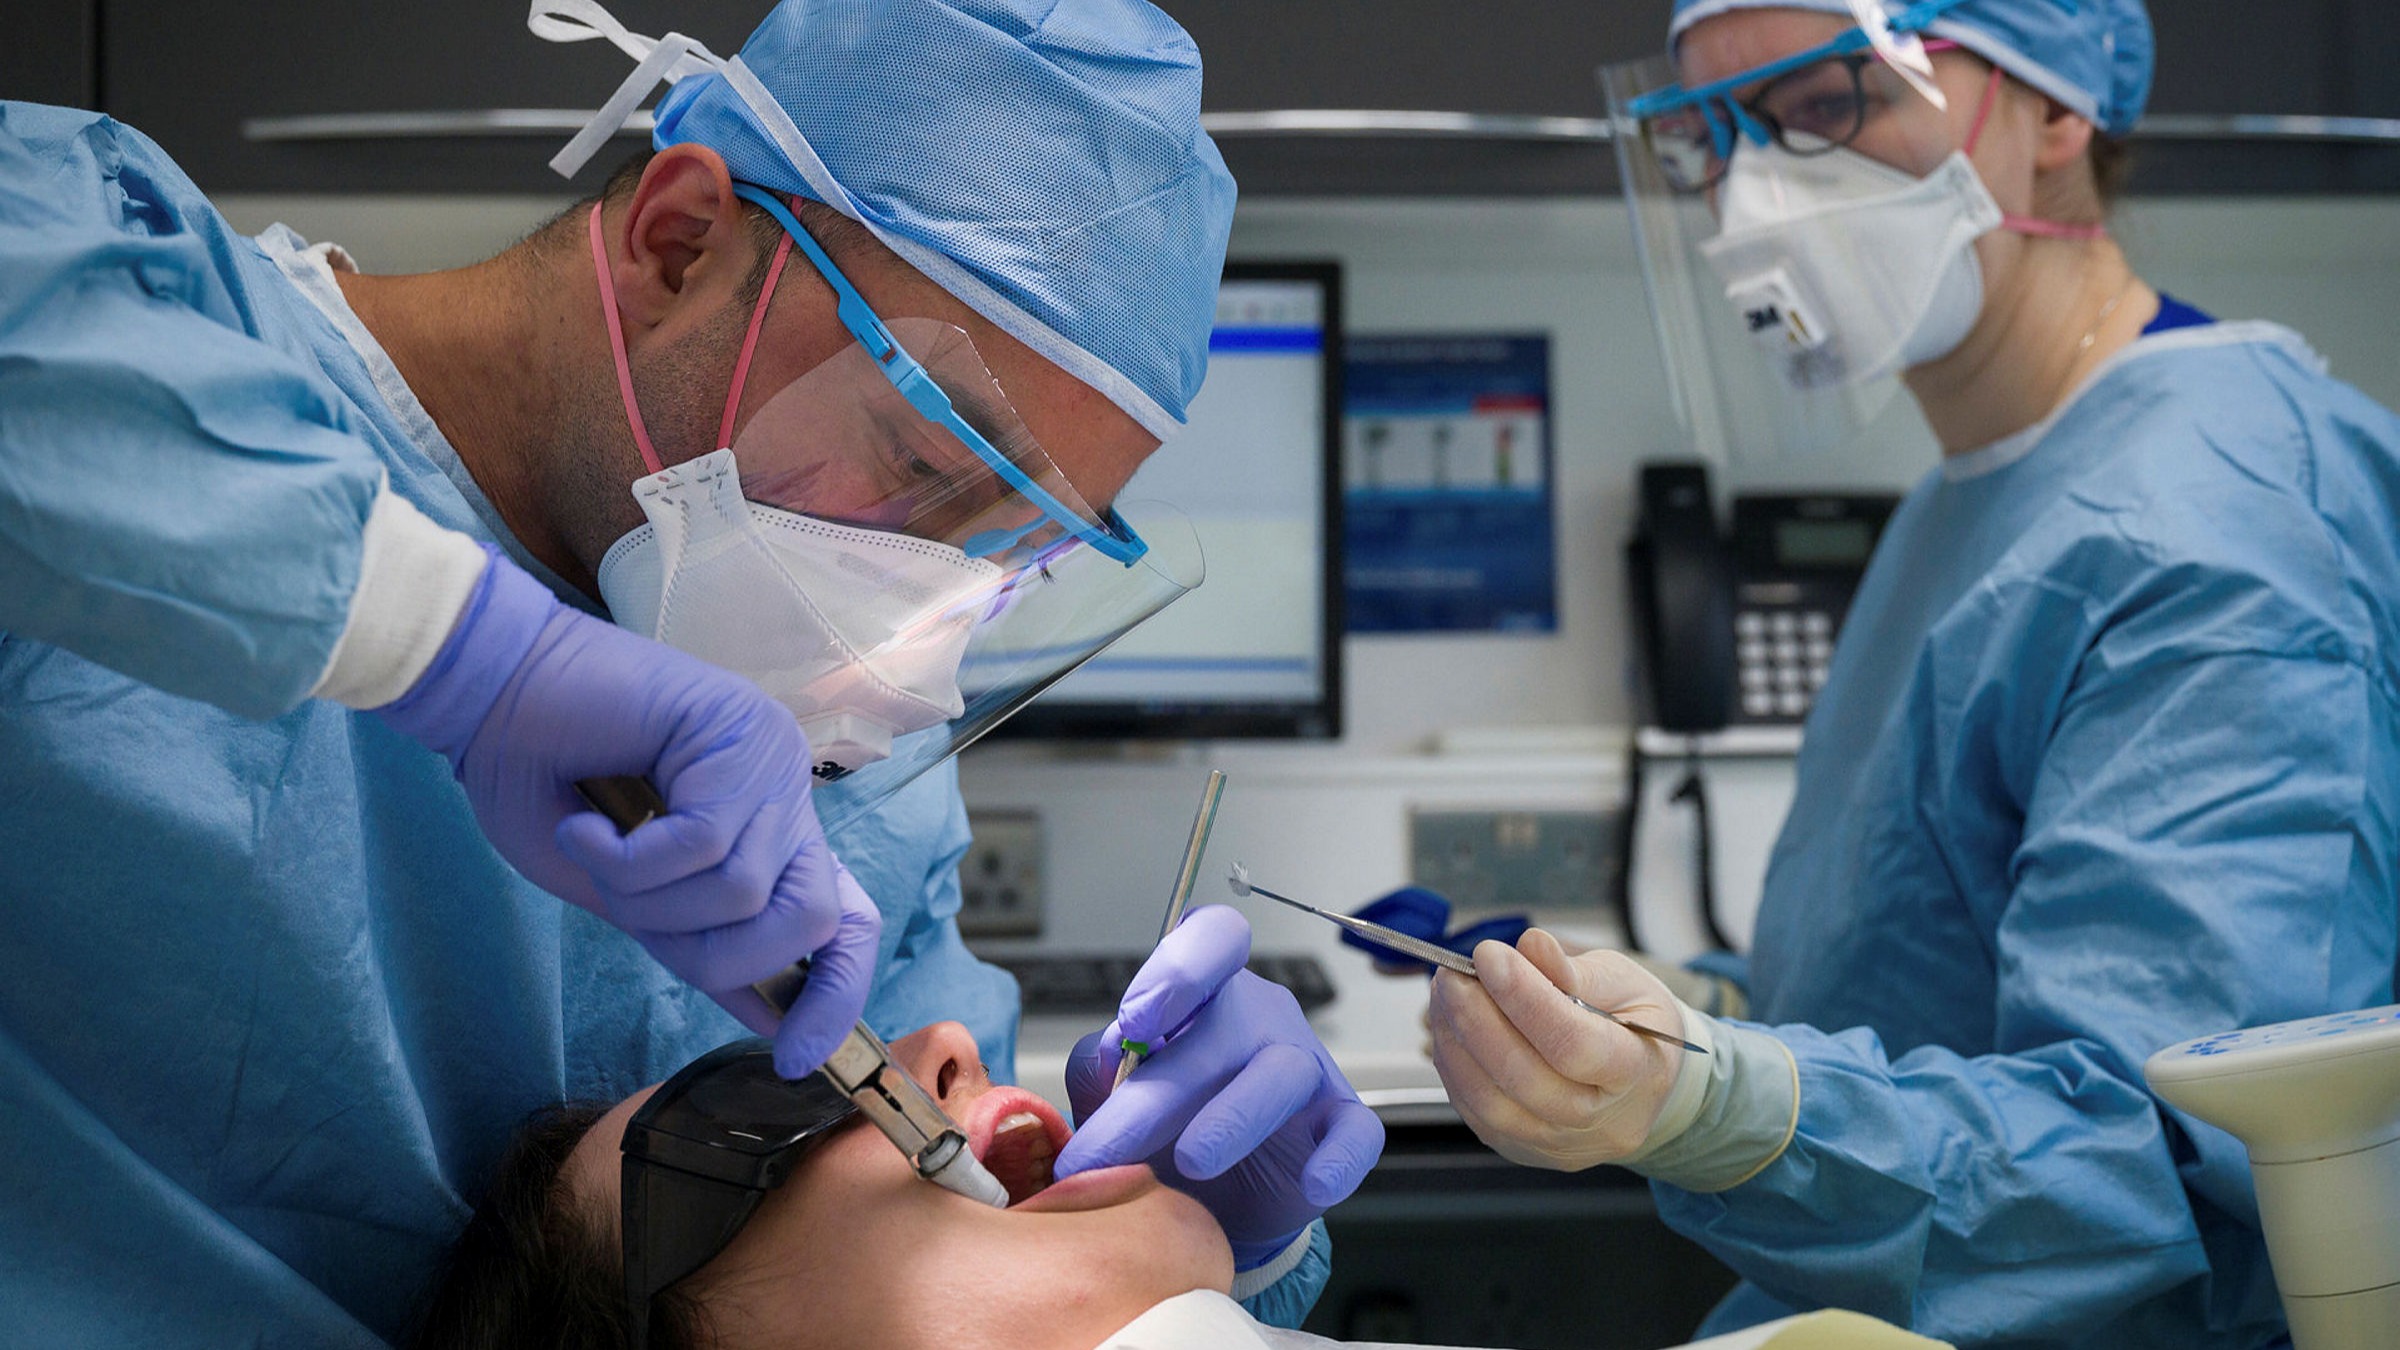 Dentists warn of looming recruitment crisis in UK | Financial Times